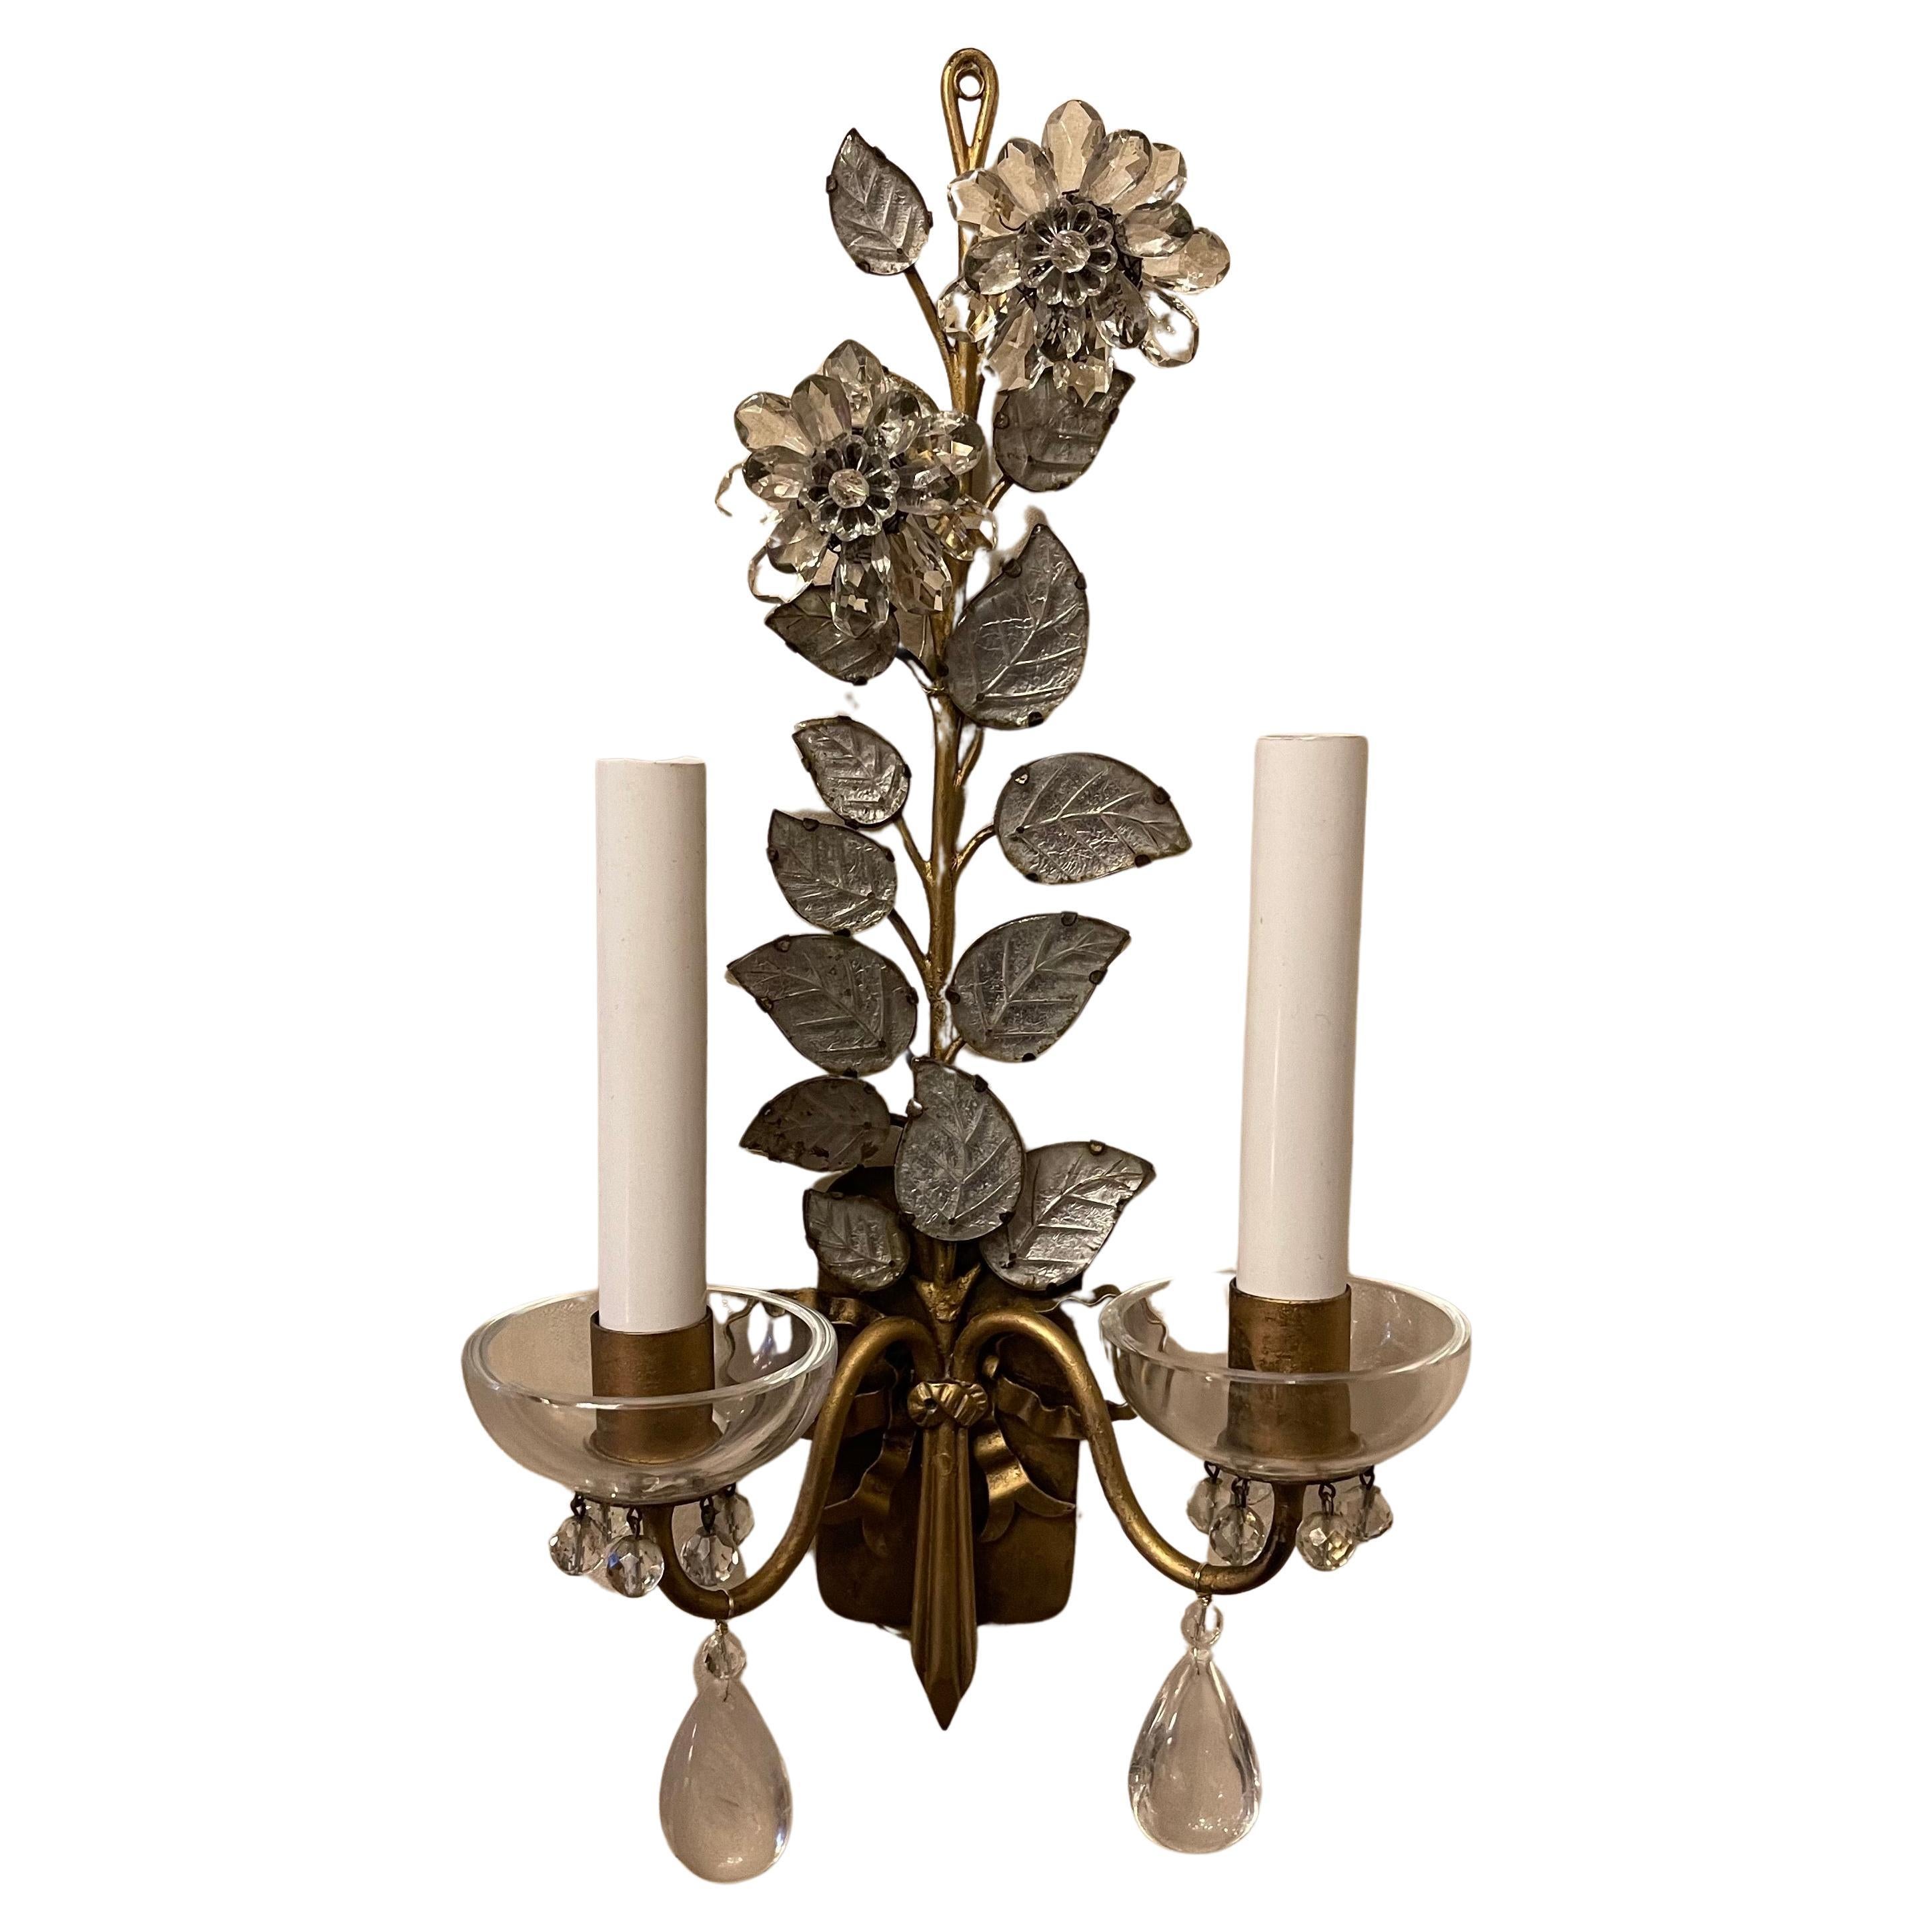 A wonderful set of four gold gilt rock crystal and crystal flower, leaf sconces having a large bow center medallion in the manner & Style of Bagues. 

2 pairs of sconces available
Each pair sold separately.